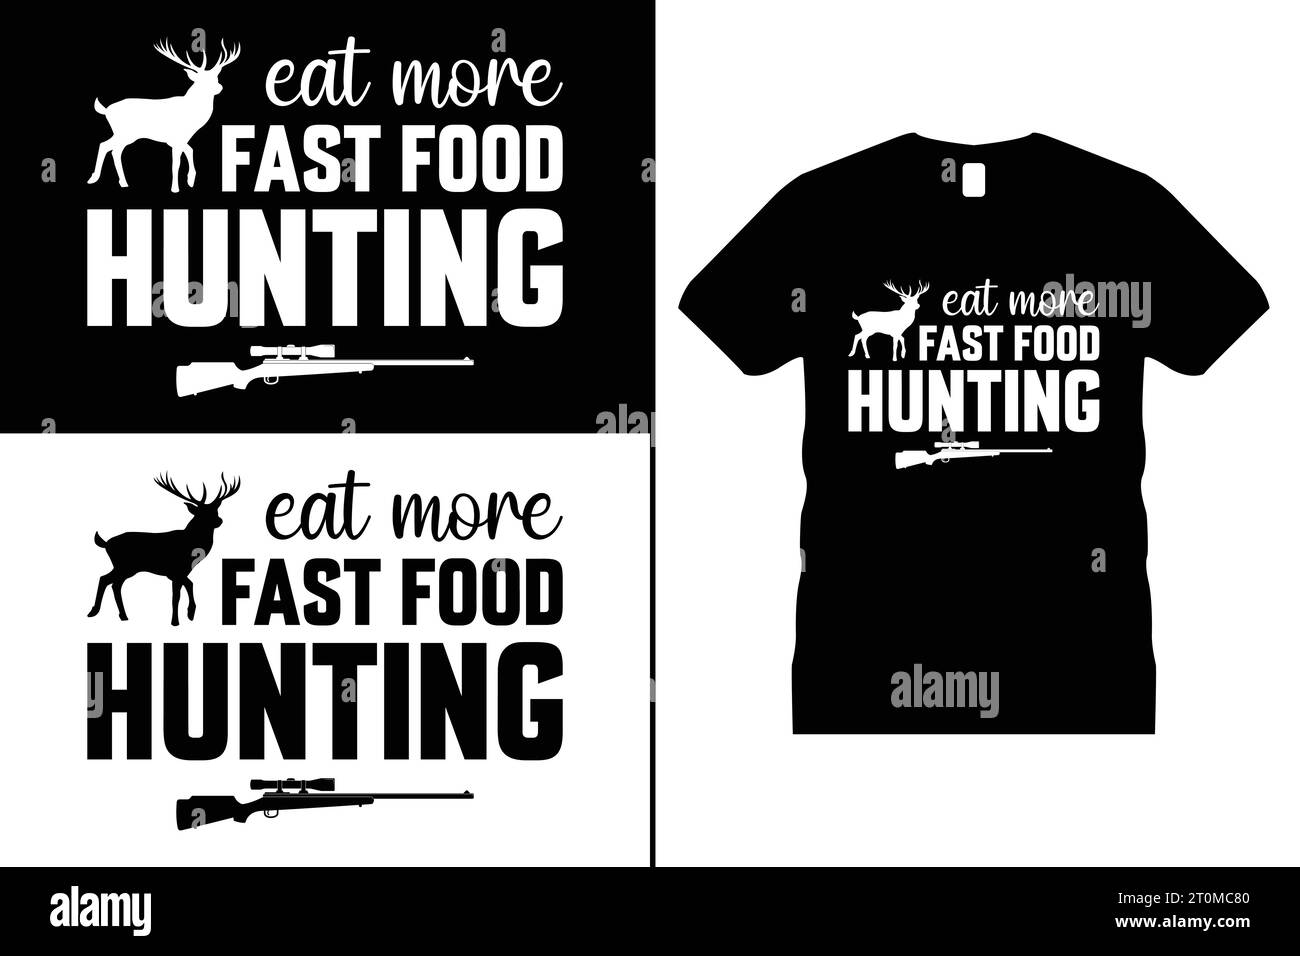 Hunting tshirt Black and White Stock Photos & Images - Alamy